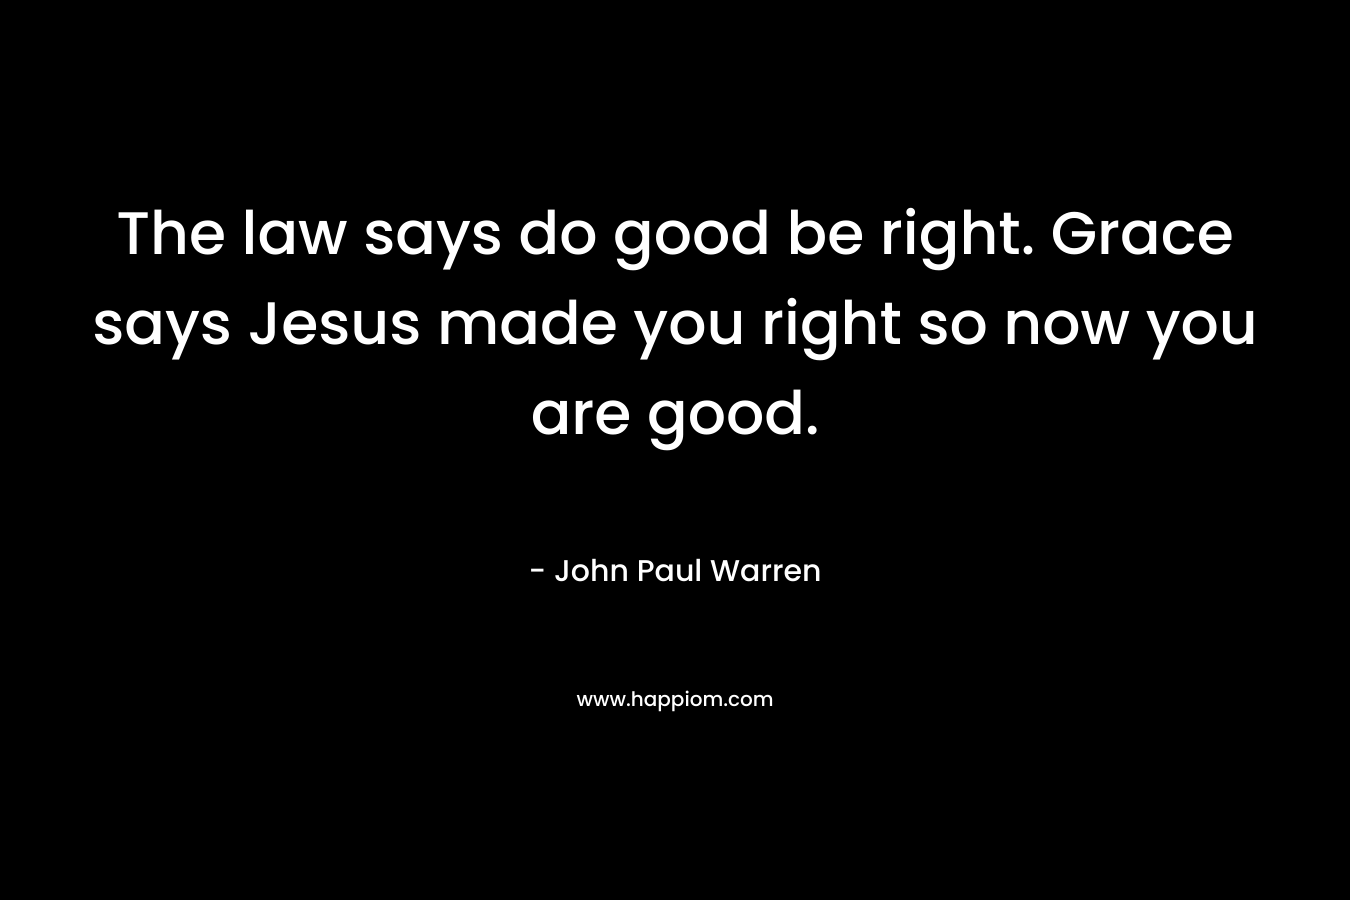 The law says do good be right. Grace says Jesus made you right so now you are good.